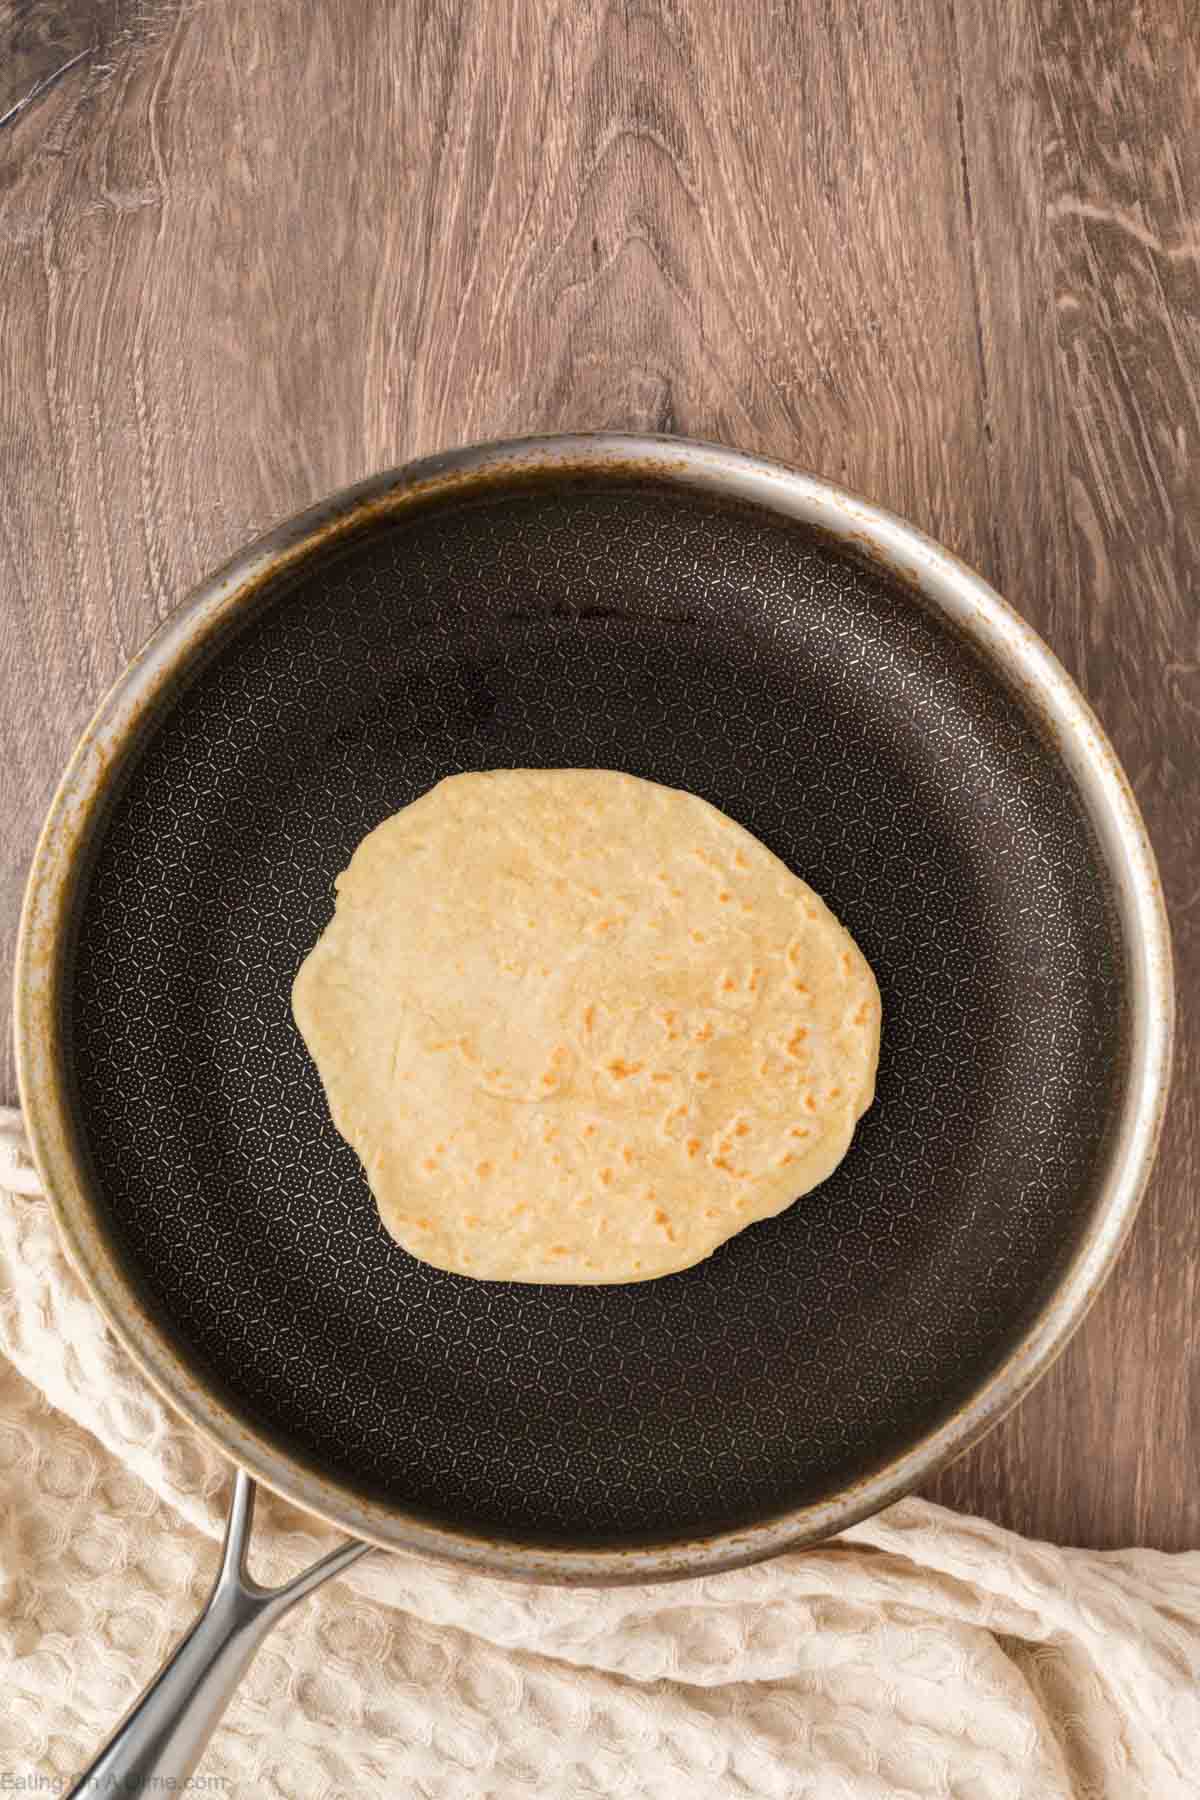 Cooking tortilla in a skillet